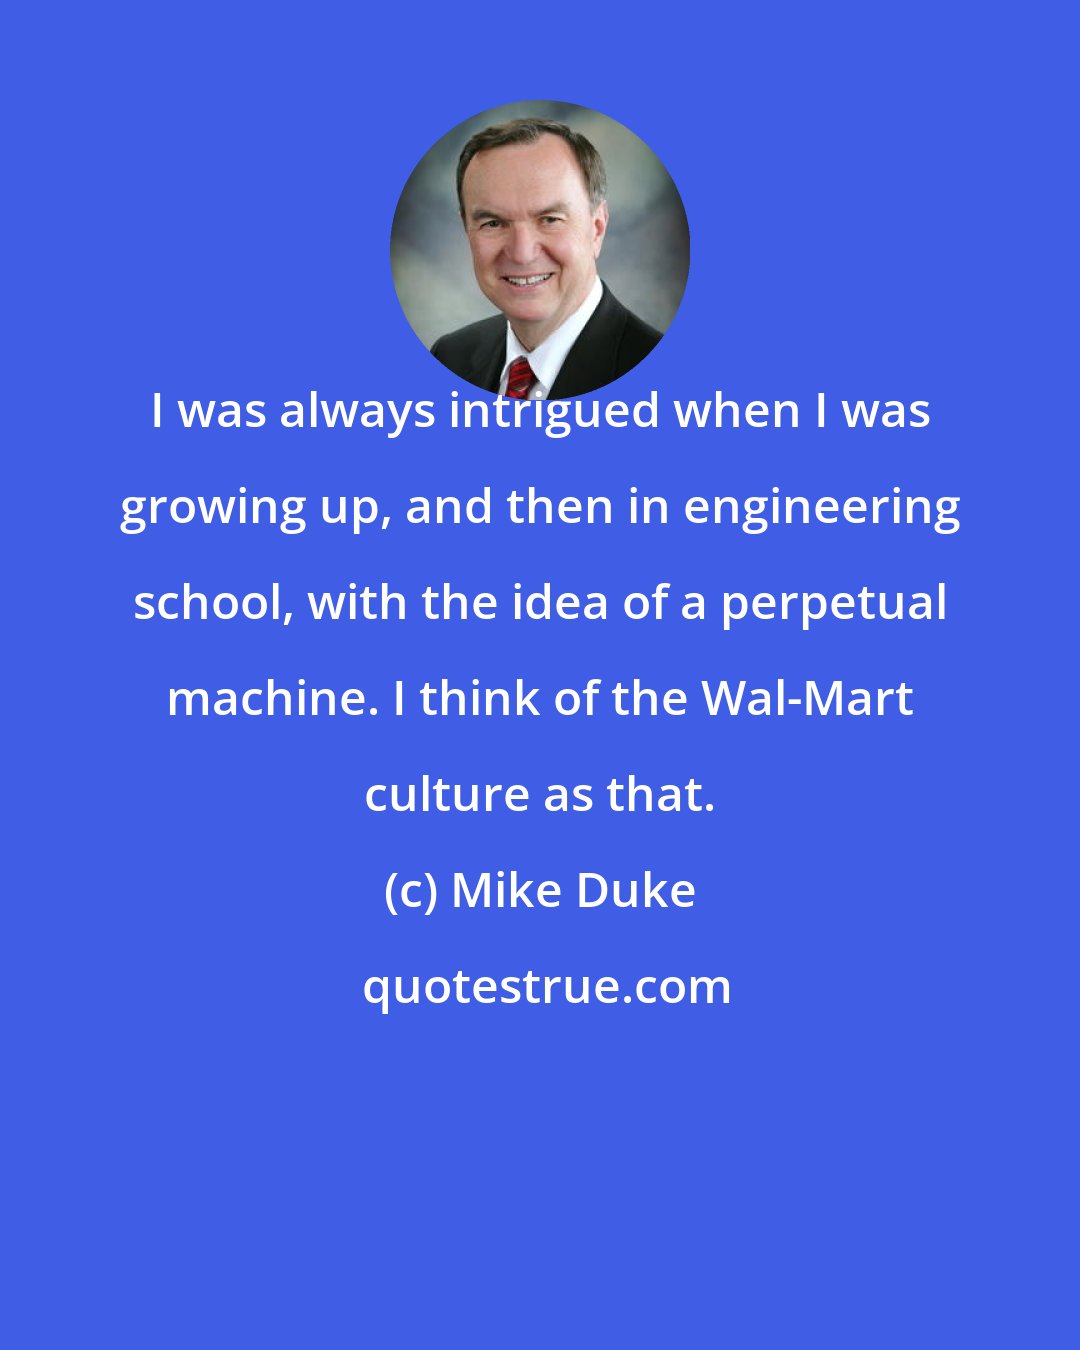 Mike Duke: I was always intrigued when I was growing up, and then in engineering school, with the idea of a perpetual machine. I think of the Wal-Mart culture as that.